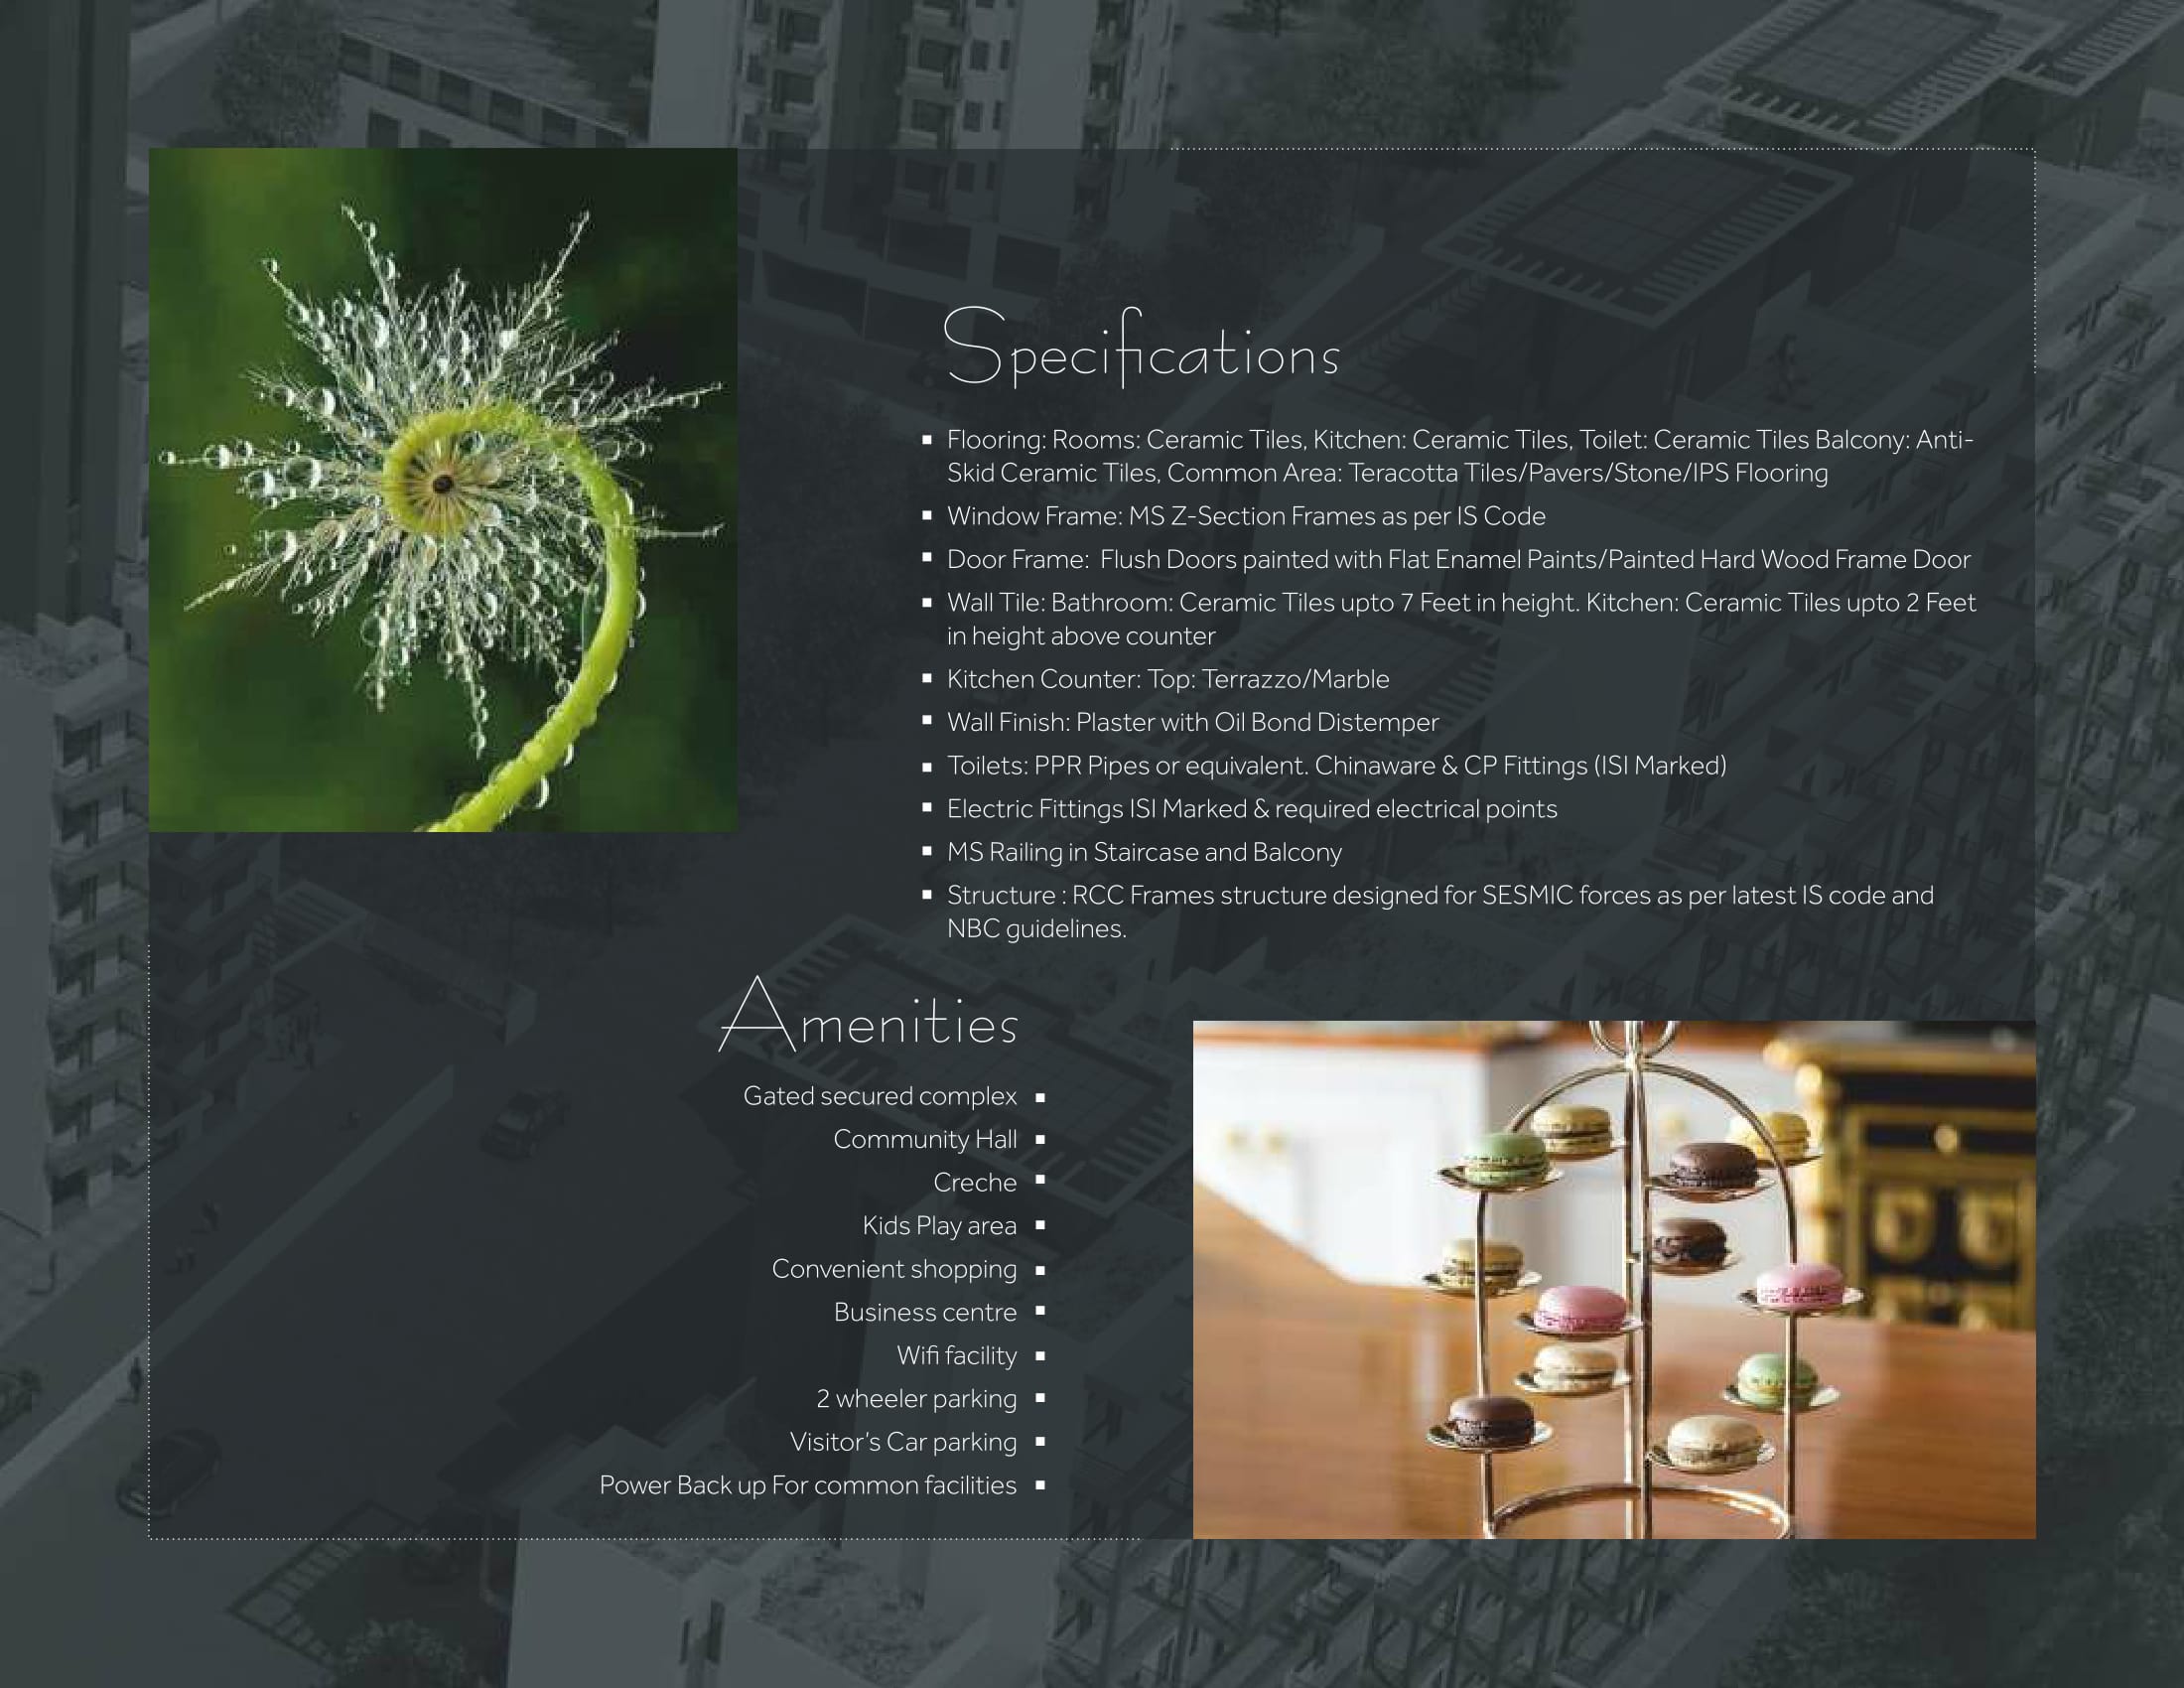 Specification and Amenities